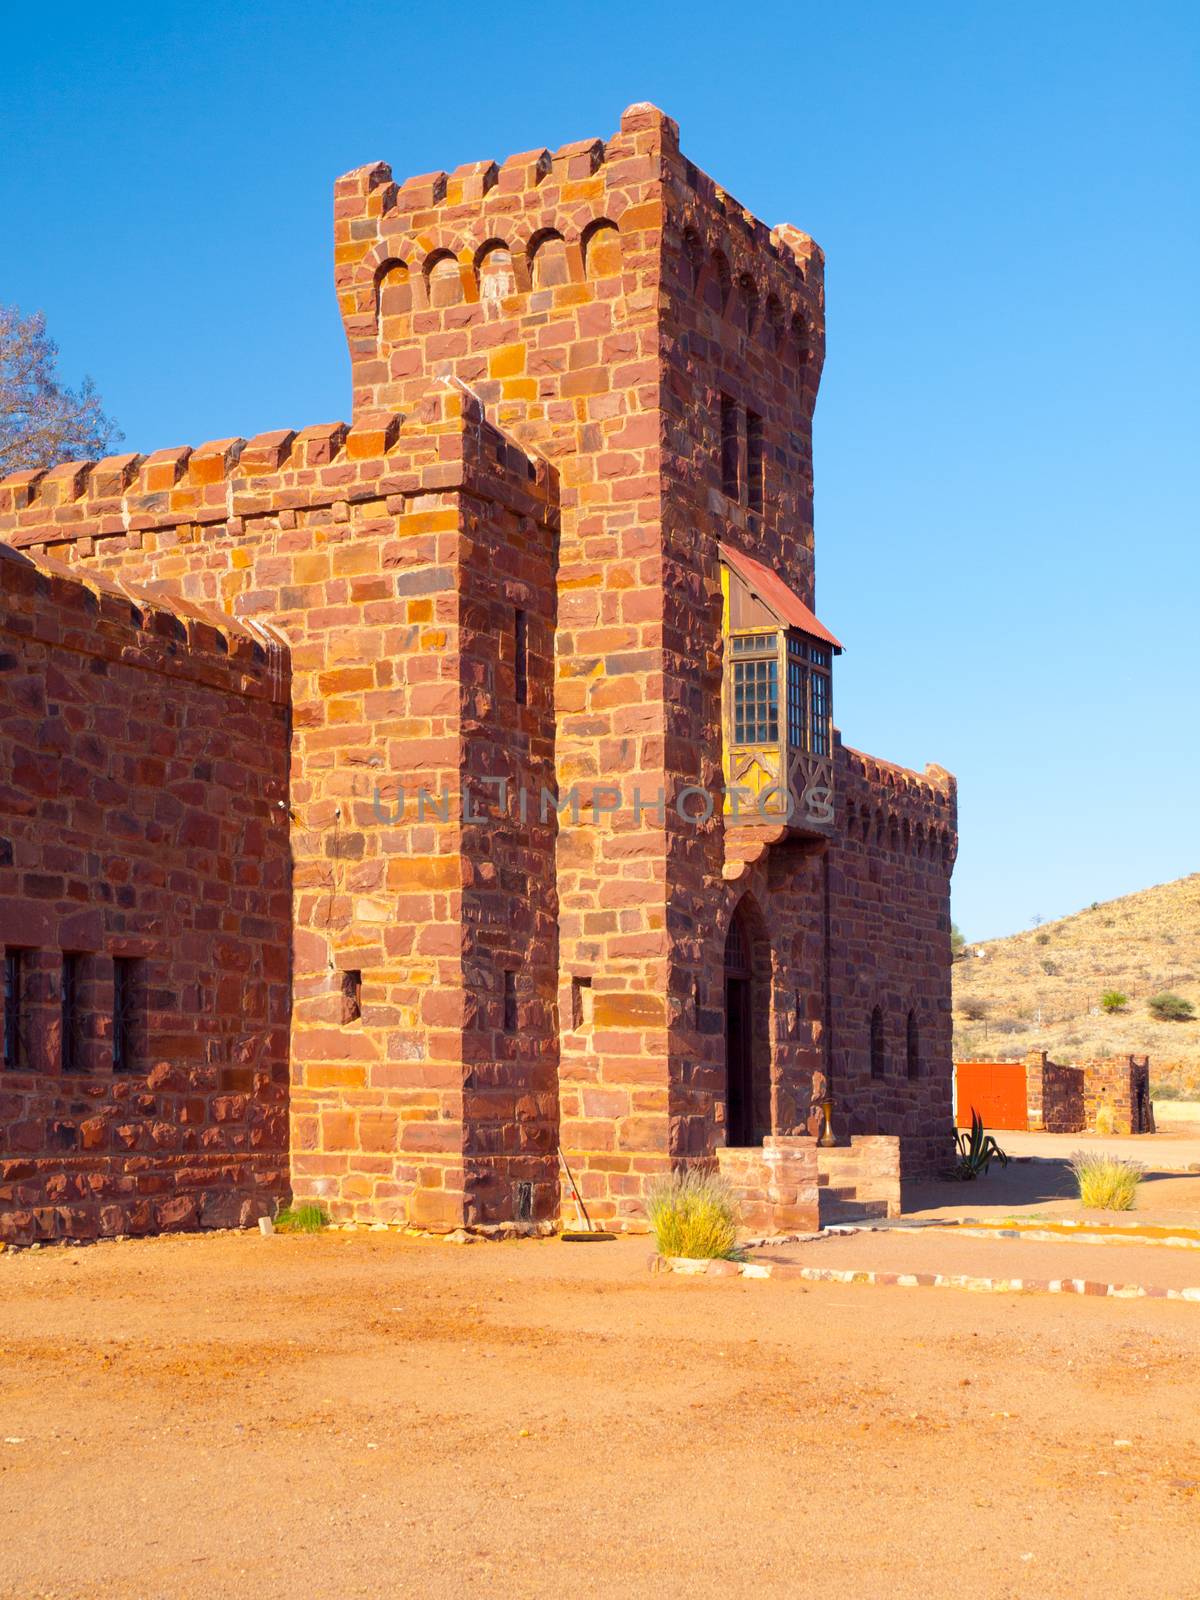 Duwisib castle. Pseudo-medieval fortress in southern Namibia, Africa by pyty